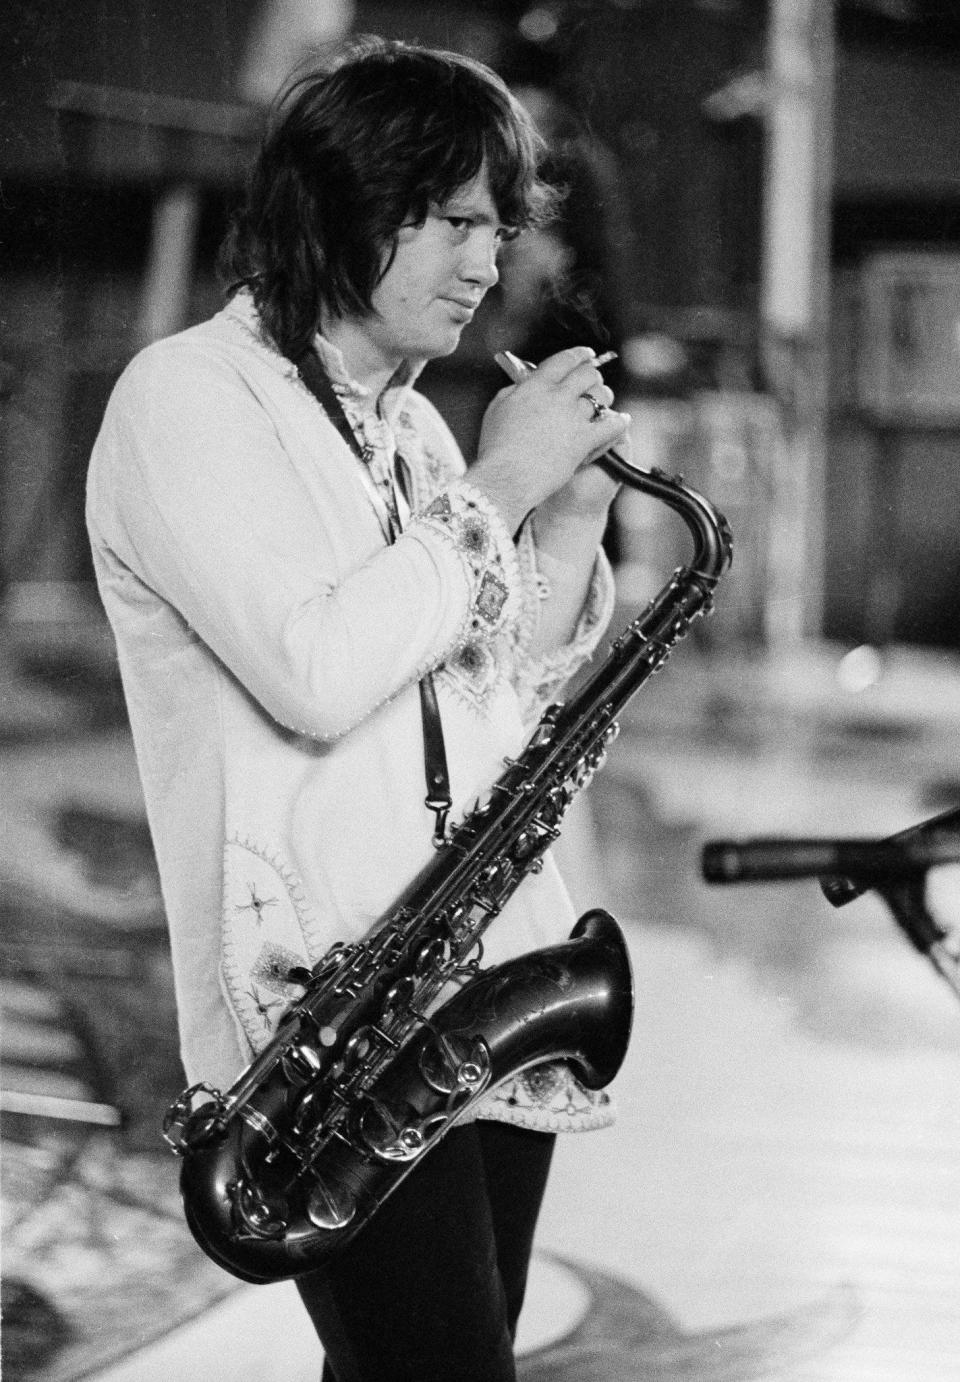 Bobby Keys on tour with The Rolling Stones in 1973.